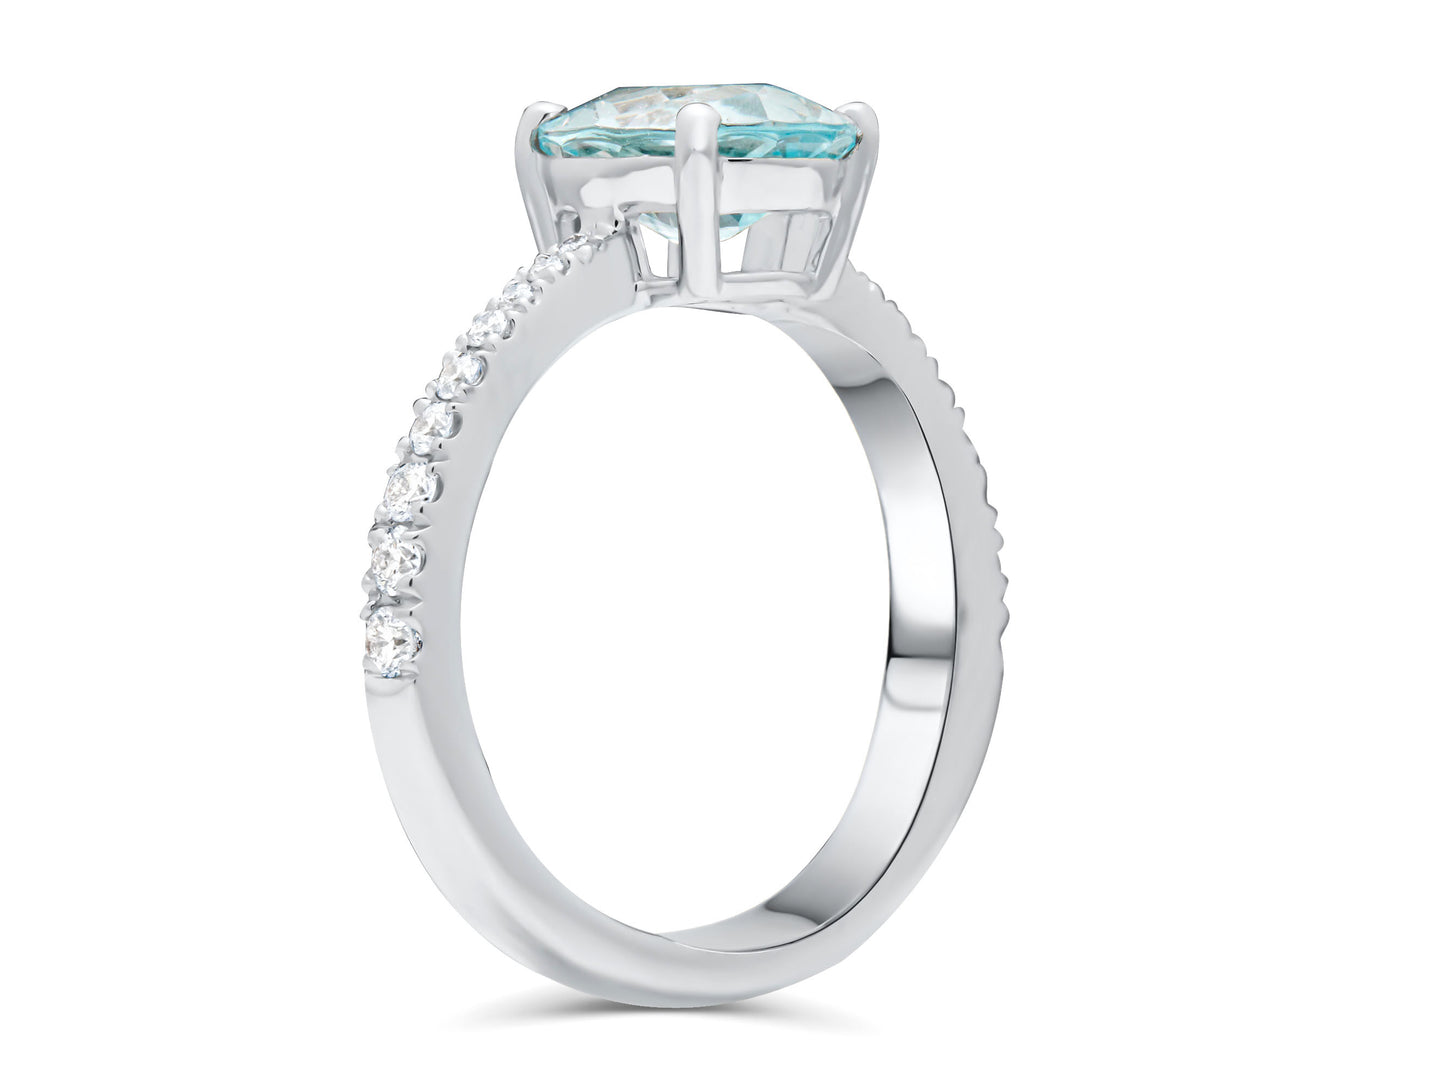 Aquamarine Oval Cut White Gold Cocktail Ring